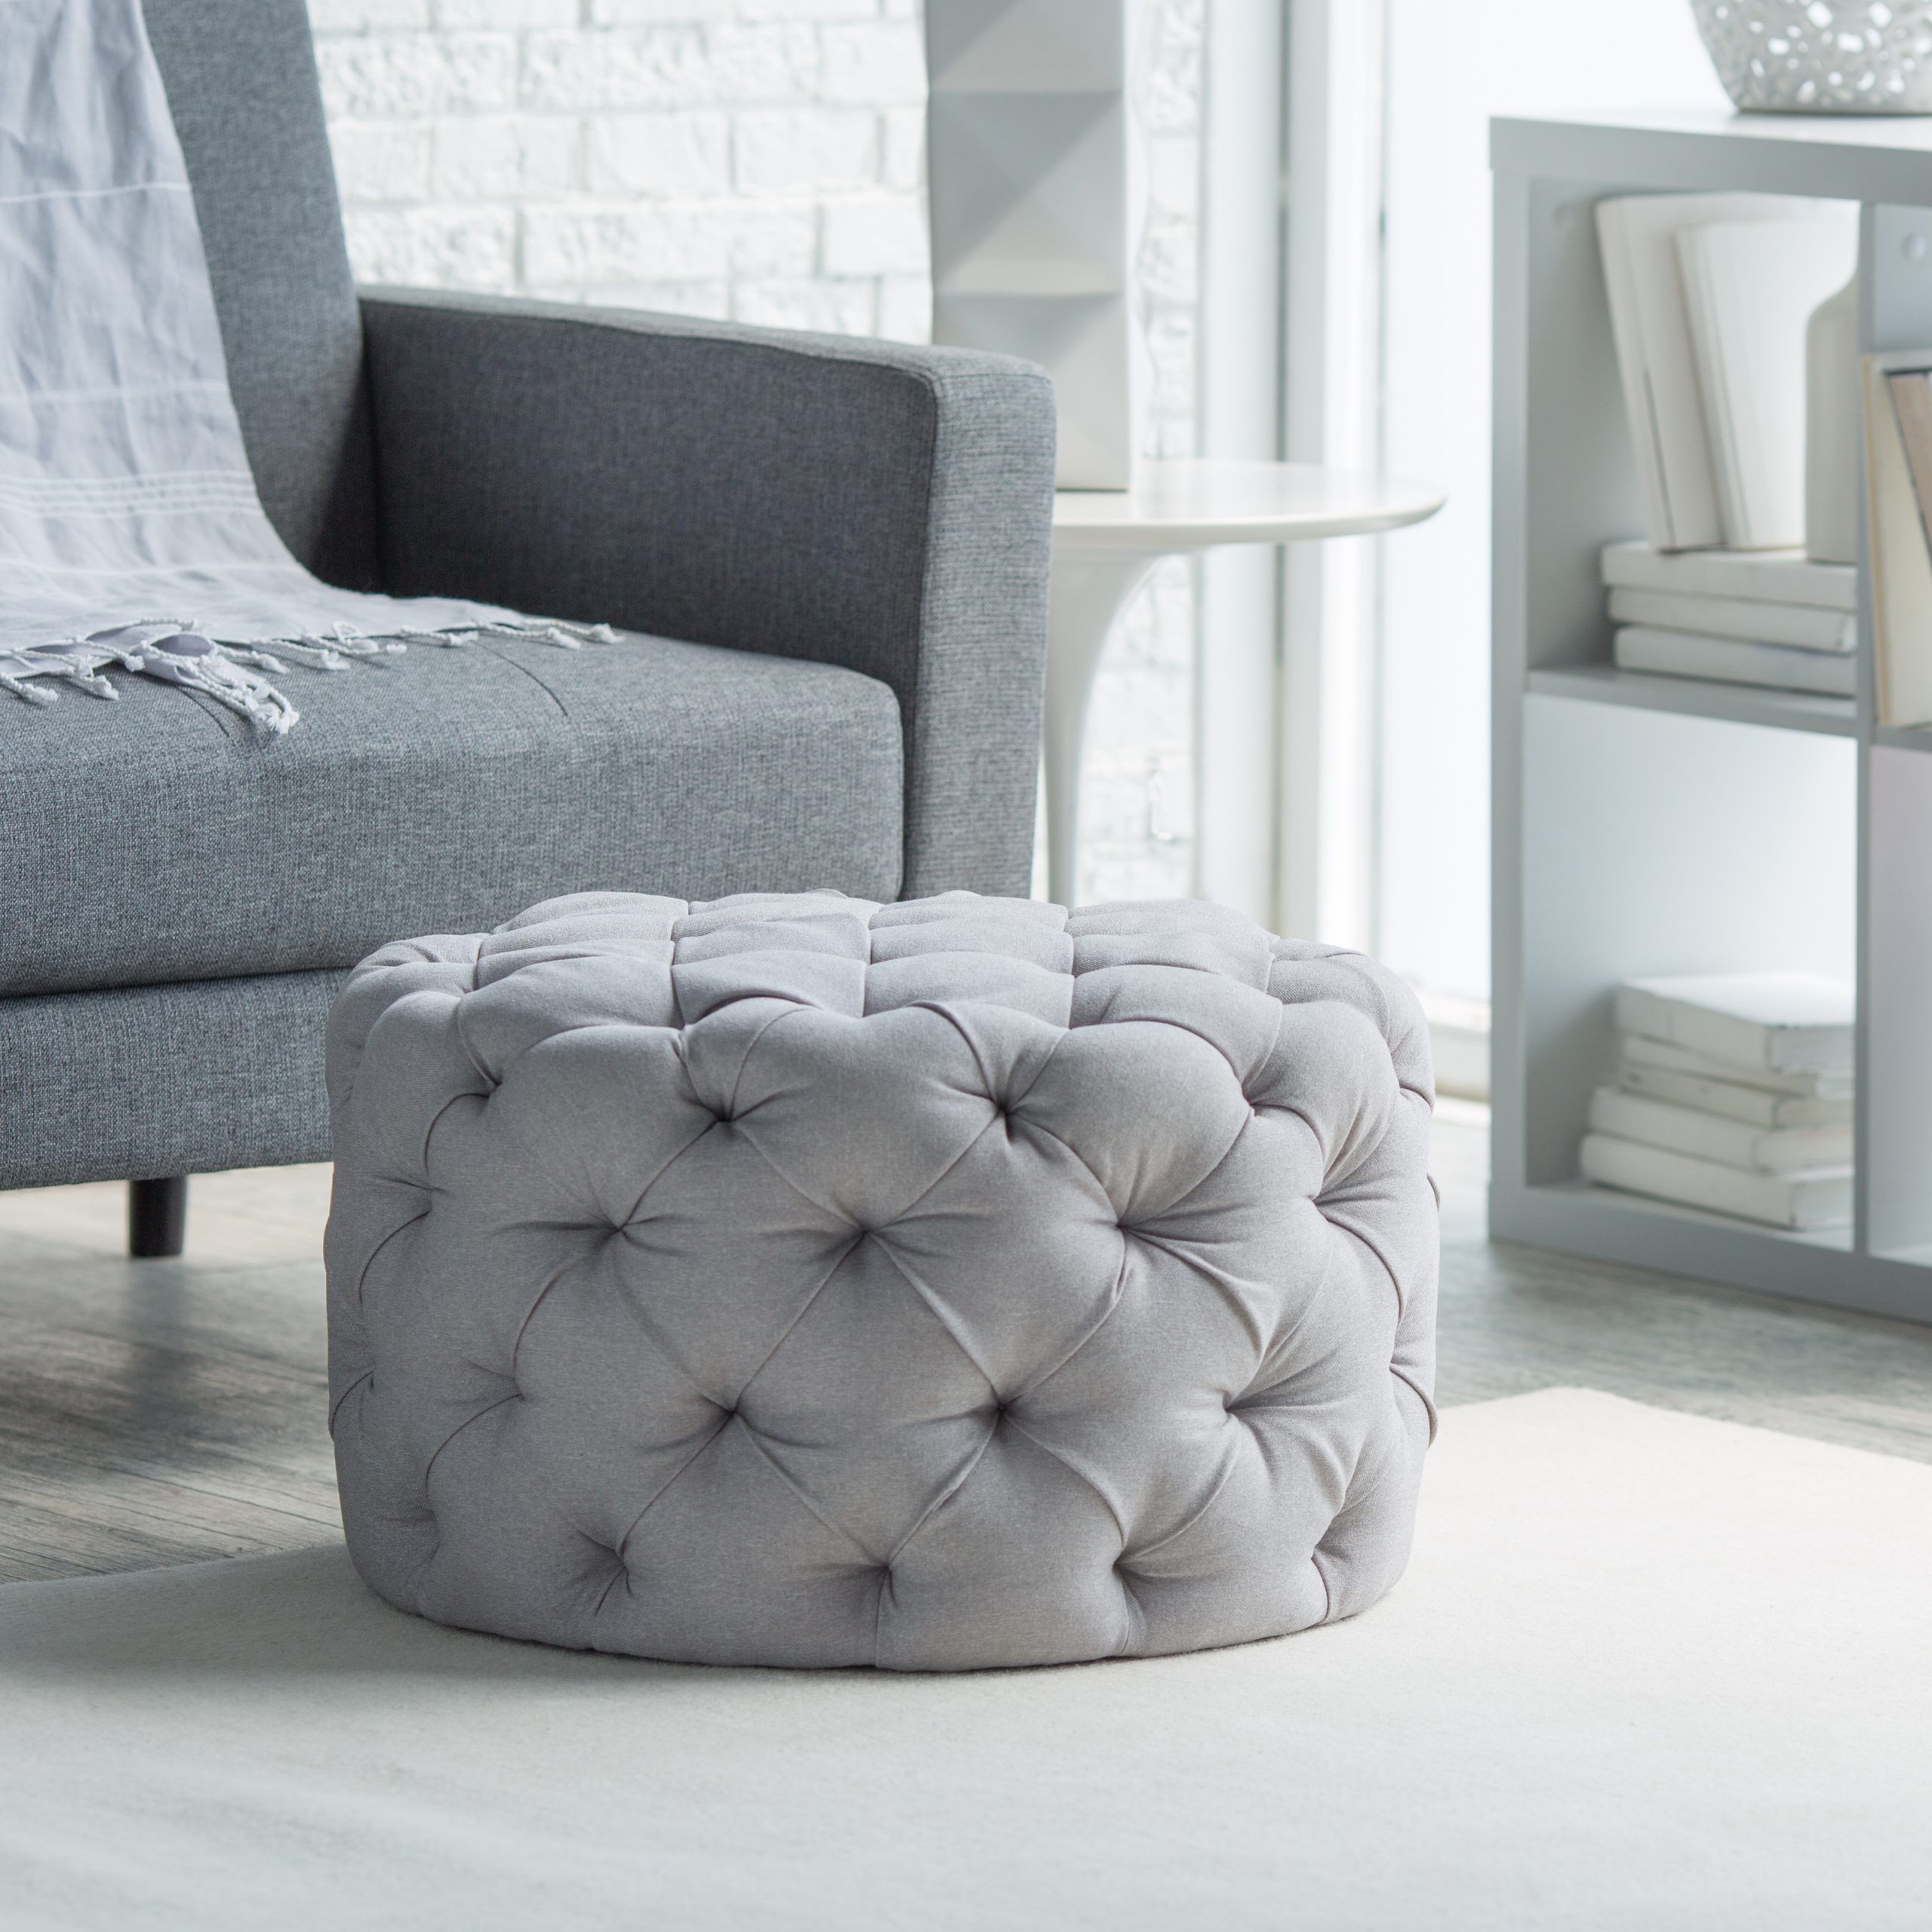 Belham Living Allover Round Tufted Ottoman On Hayneedle – Grey Inside Gray Fabric Tufted Oval Ottomans (View 8 of 20)